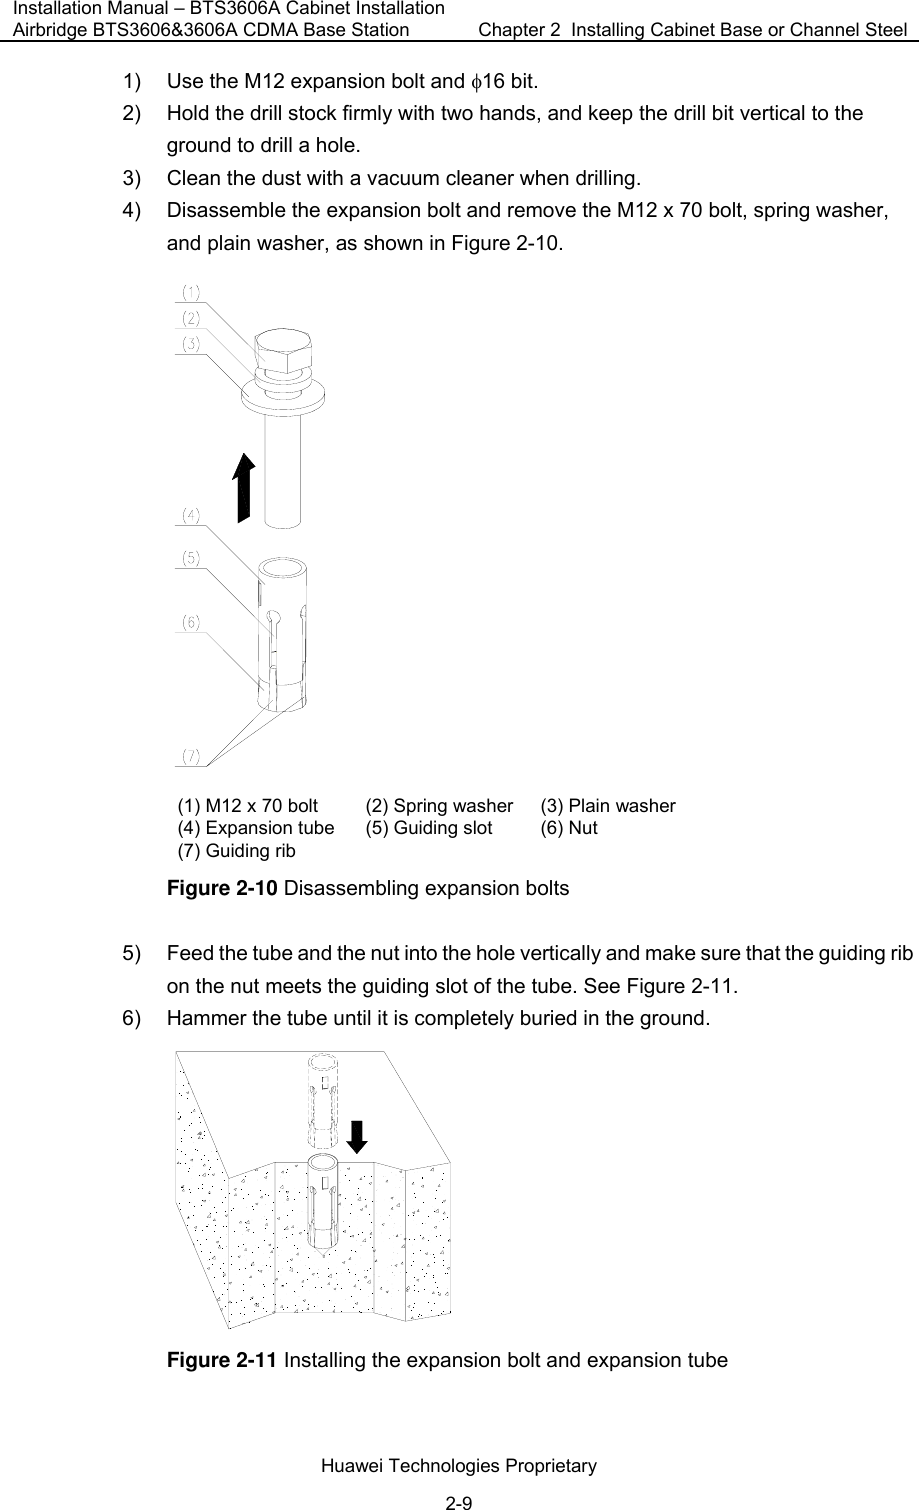 Installation Manual – BTS3606A Cabinet Installation Airbridge BTS3606&amp;3606A CDMA Base Station  Chapter 2  Installing Cabinet Base or Channel Steel  Huawei Technologies Proprietary 2-9 1)  Use the M12 expansion bolt and φ16 bit. 2)  Hold the drill stock firmly with two hands, and keep the drill bit vertical to the ground to drill a hole. 3)  Clean the dust with a vacuum cleaner when drilling. 4)  Disassemble the expansion bolt and remove the M12 x 70 bolt, spring washer, and plain washer, as shown in Figure 2-10.  (1) M12 x 70 bolt (2) Spring washer (3) Plain washer (4) Expansion tube (5) Guiding slot (6) Nut (7) Guiding rib    Figure 2-10 Disassembling expansion bolts 5)  Feed the tube and the nut into the hole vertically and make sure that the guiding rib on the nut meets the guiding slot of the tube. See Figure 2-11. 6)  Hammer the tube until it is completely buried in the ground.  Figure 2-11 Installing the expansion bolt and expansion tube 